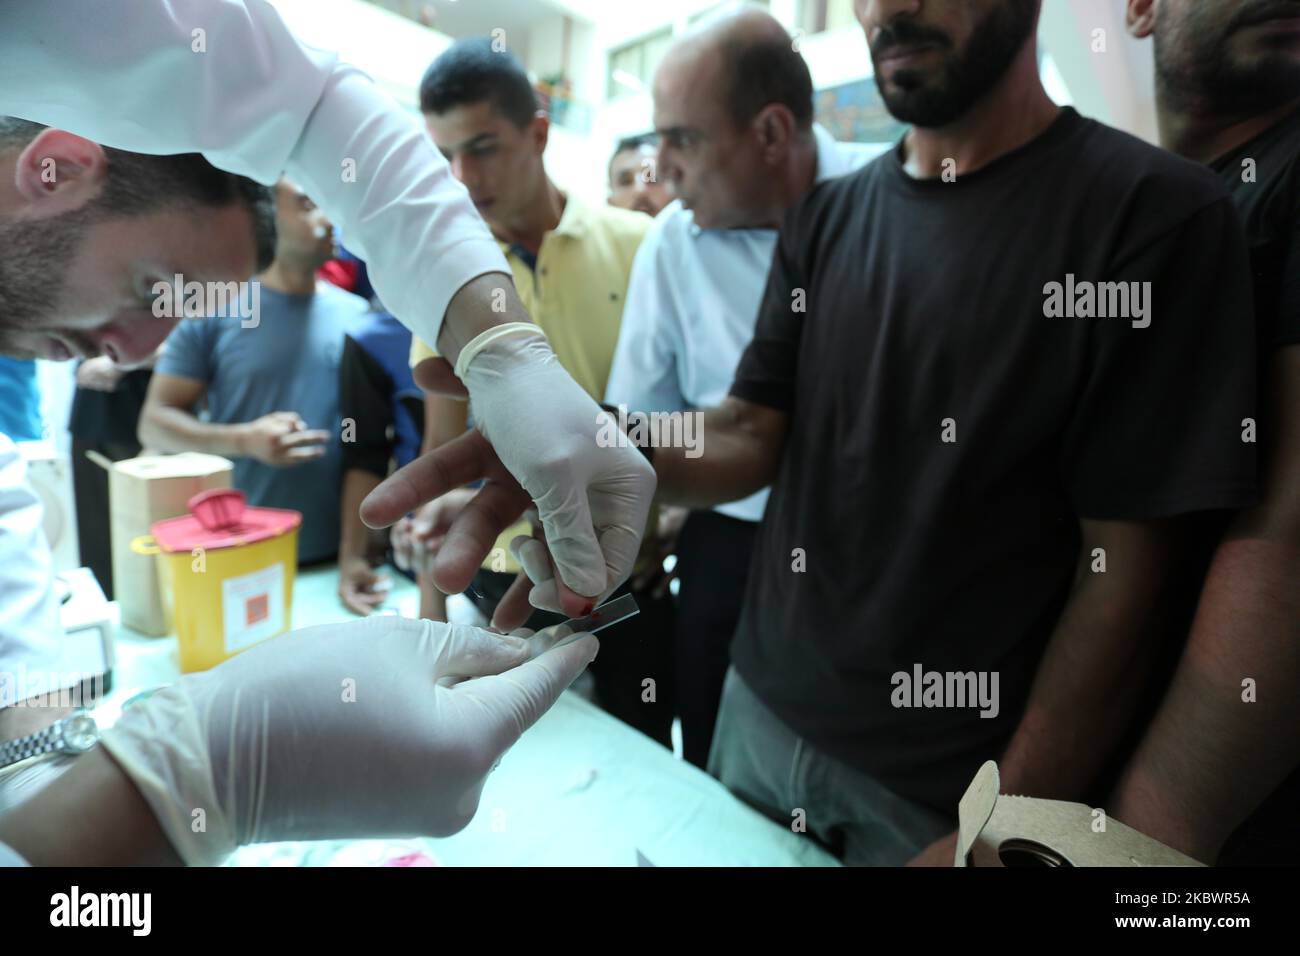 Palestinians donate bloods, in Gaza, Palestine, on August 5, 2020 during a public blood donation campaign for the lebanese community following the explosion at Beirut port. (Photo by Majdi Fathi/NurPhoto) Stock Photo